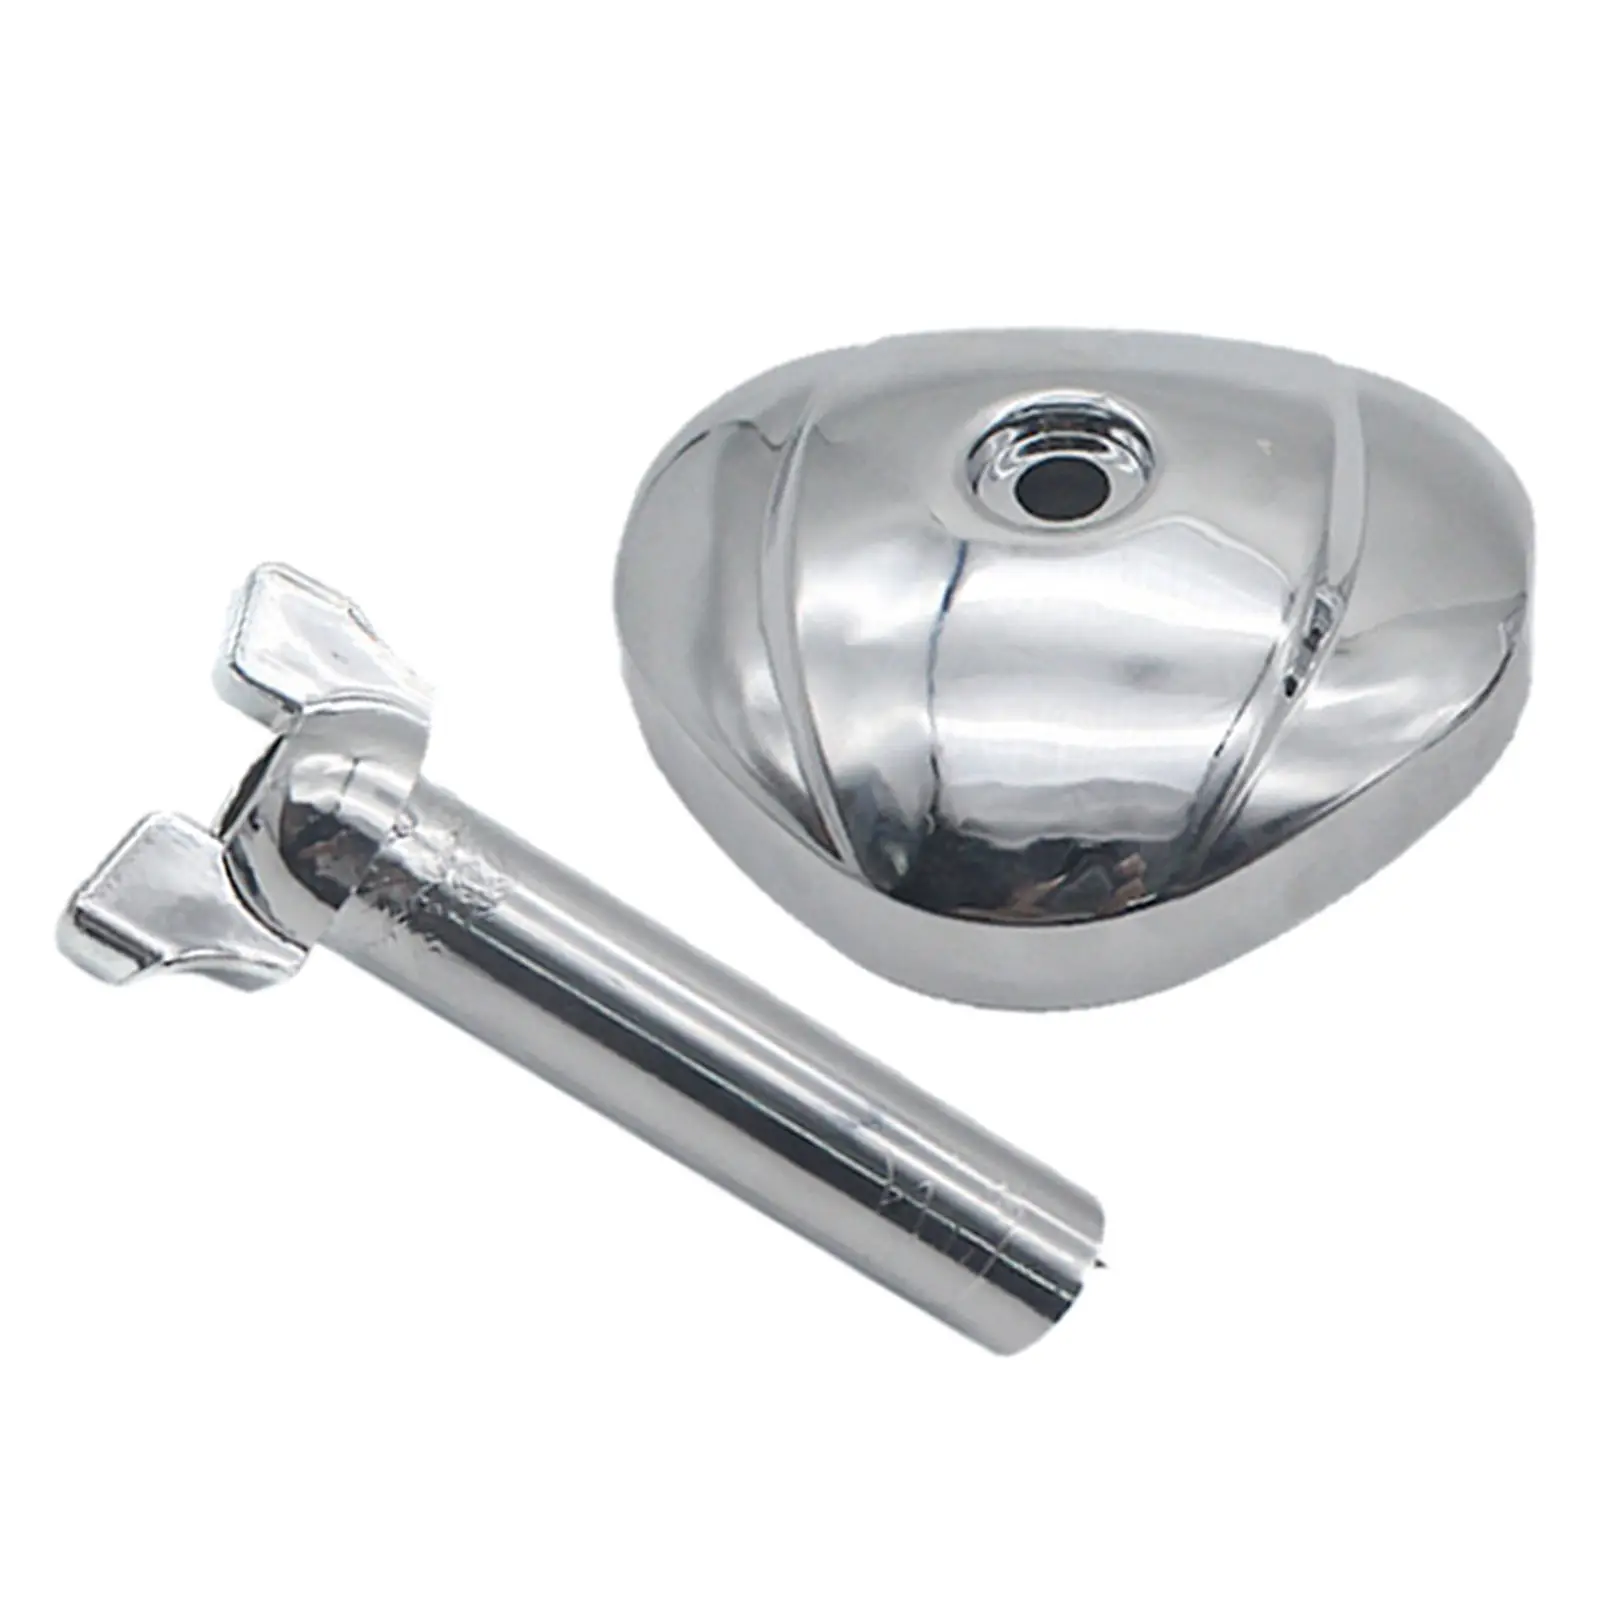 Gas Fuel Tank Switch Handle Carburetor Cover Parts For Honda Accessories Chrome ABS Motorcycle Carburetor Cover Silver